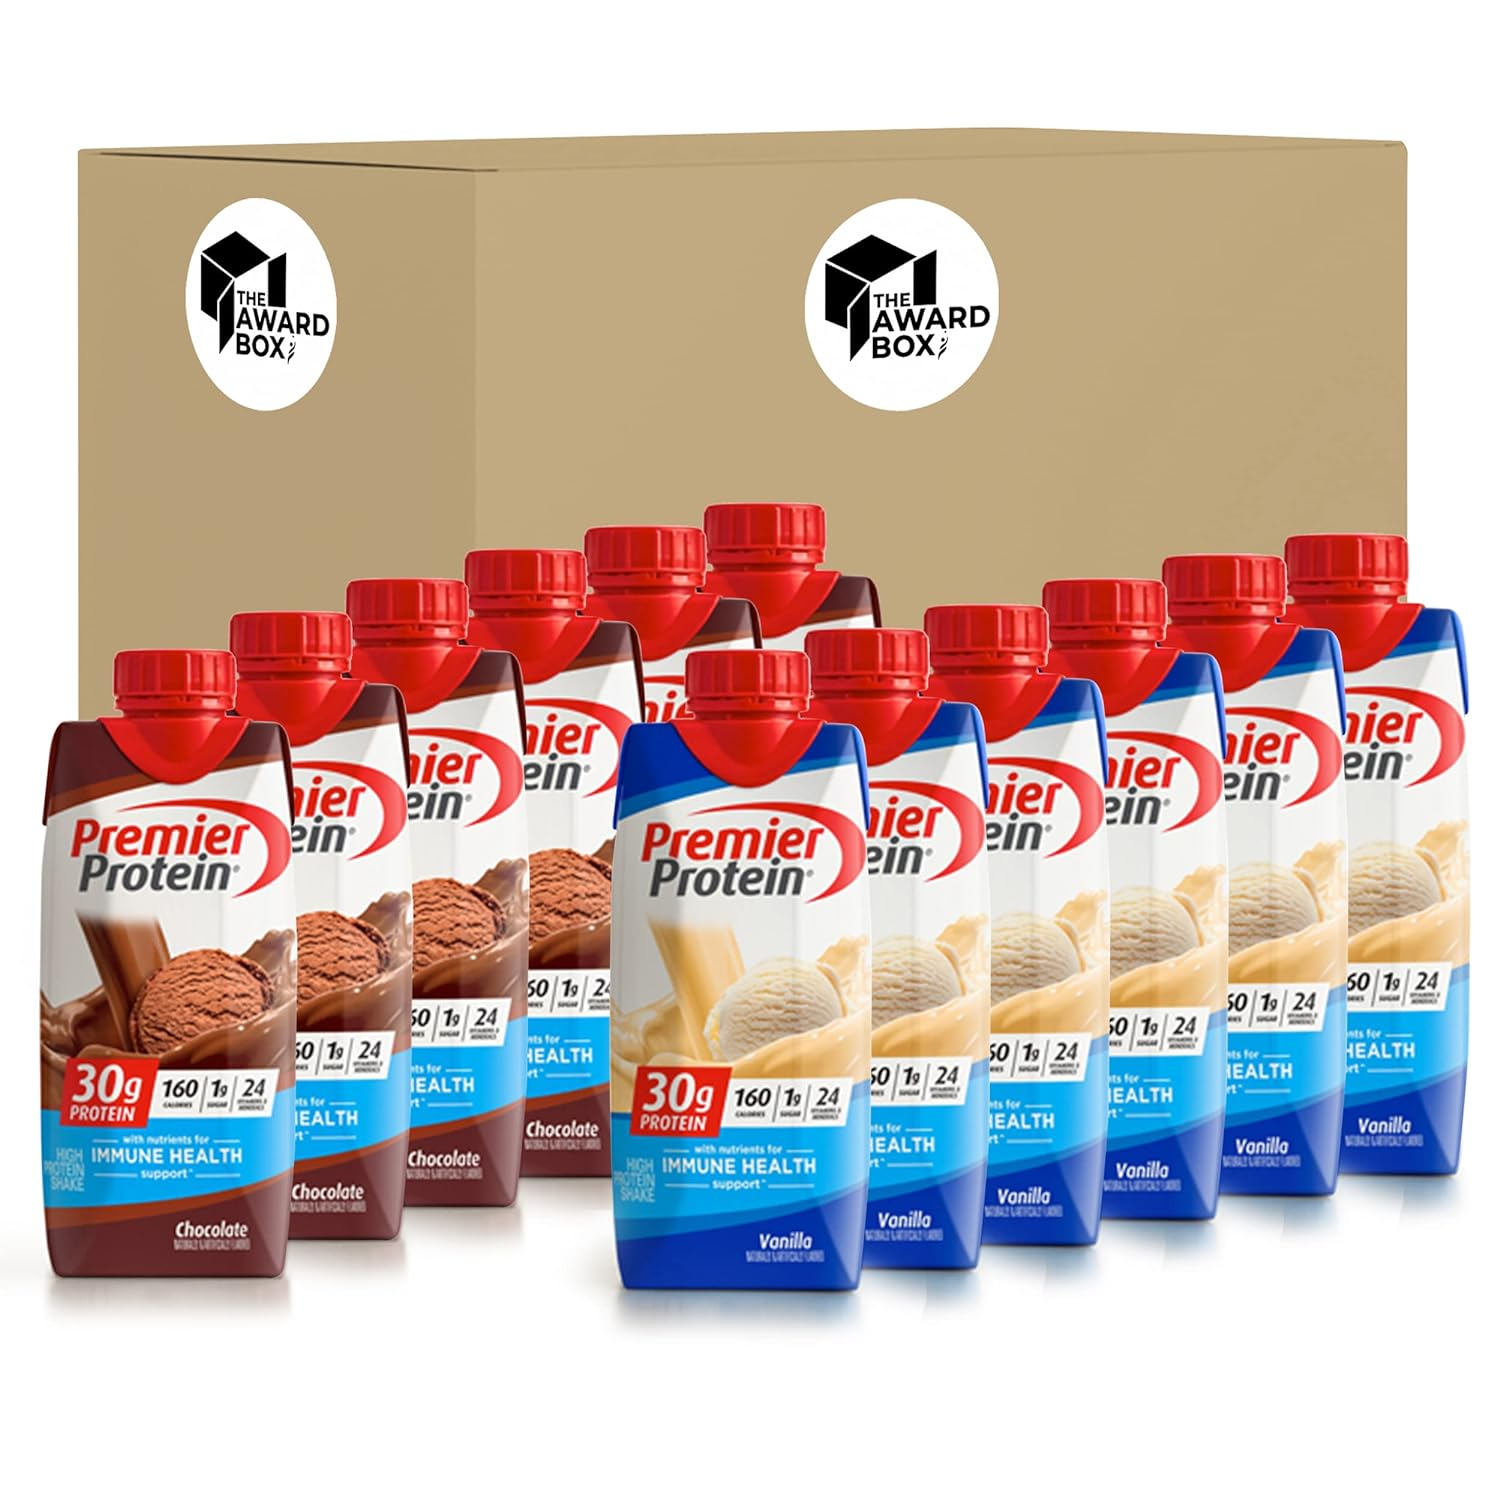 Premier Protein High Protein Shake, Chocolate and Vanilla Variety pack, 11 Fl oz. 6 of each flavor (12 Pack) in The Award Box